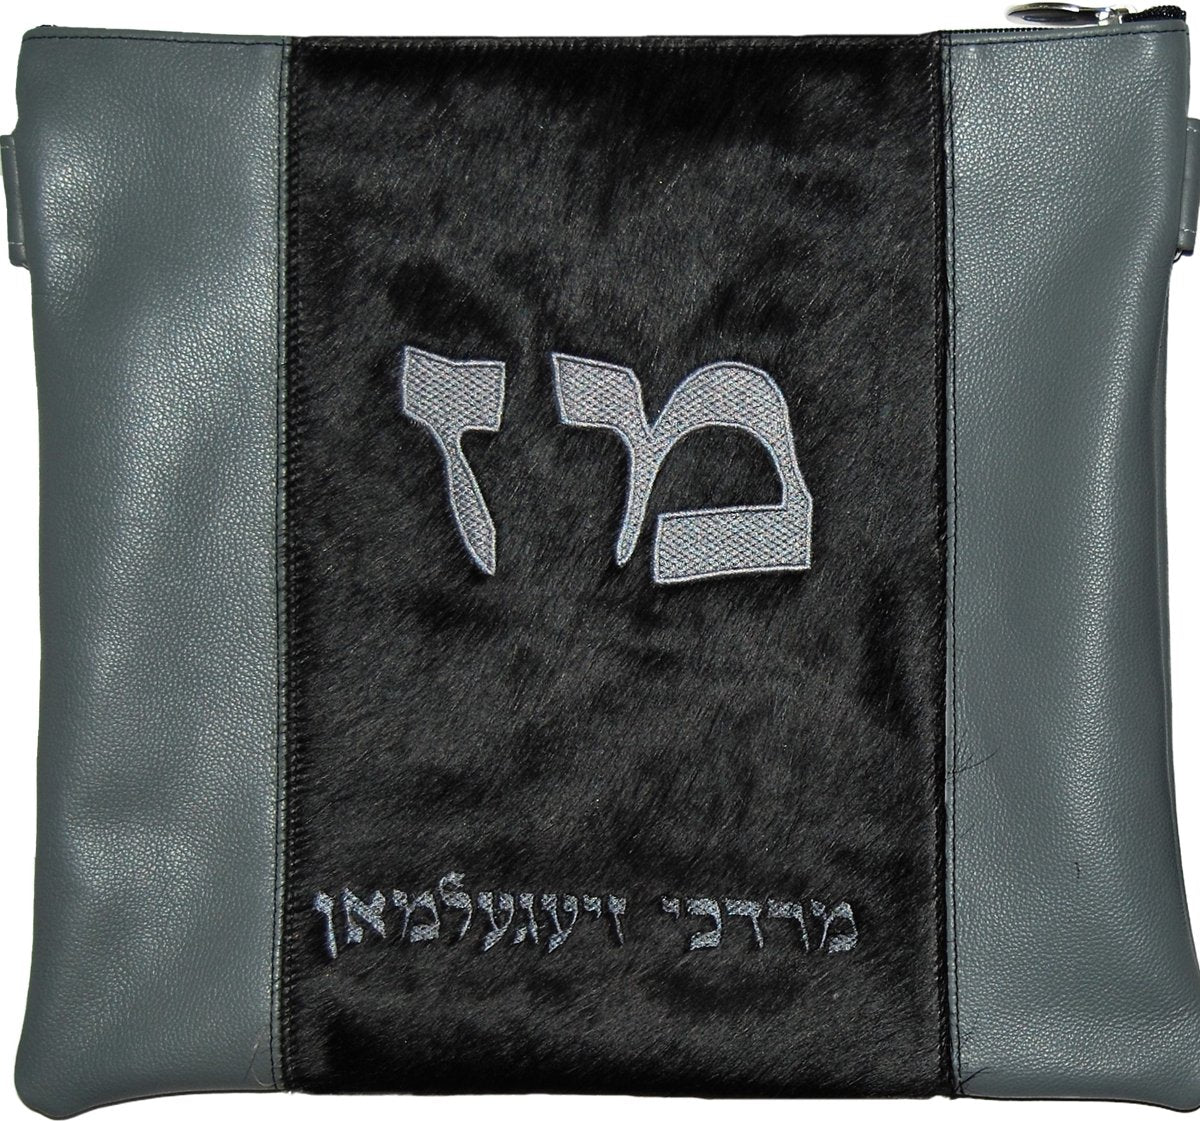 3 horizonal stripe Tallis and Tefillin bag with large initials. - Simcha Couture